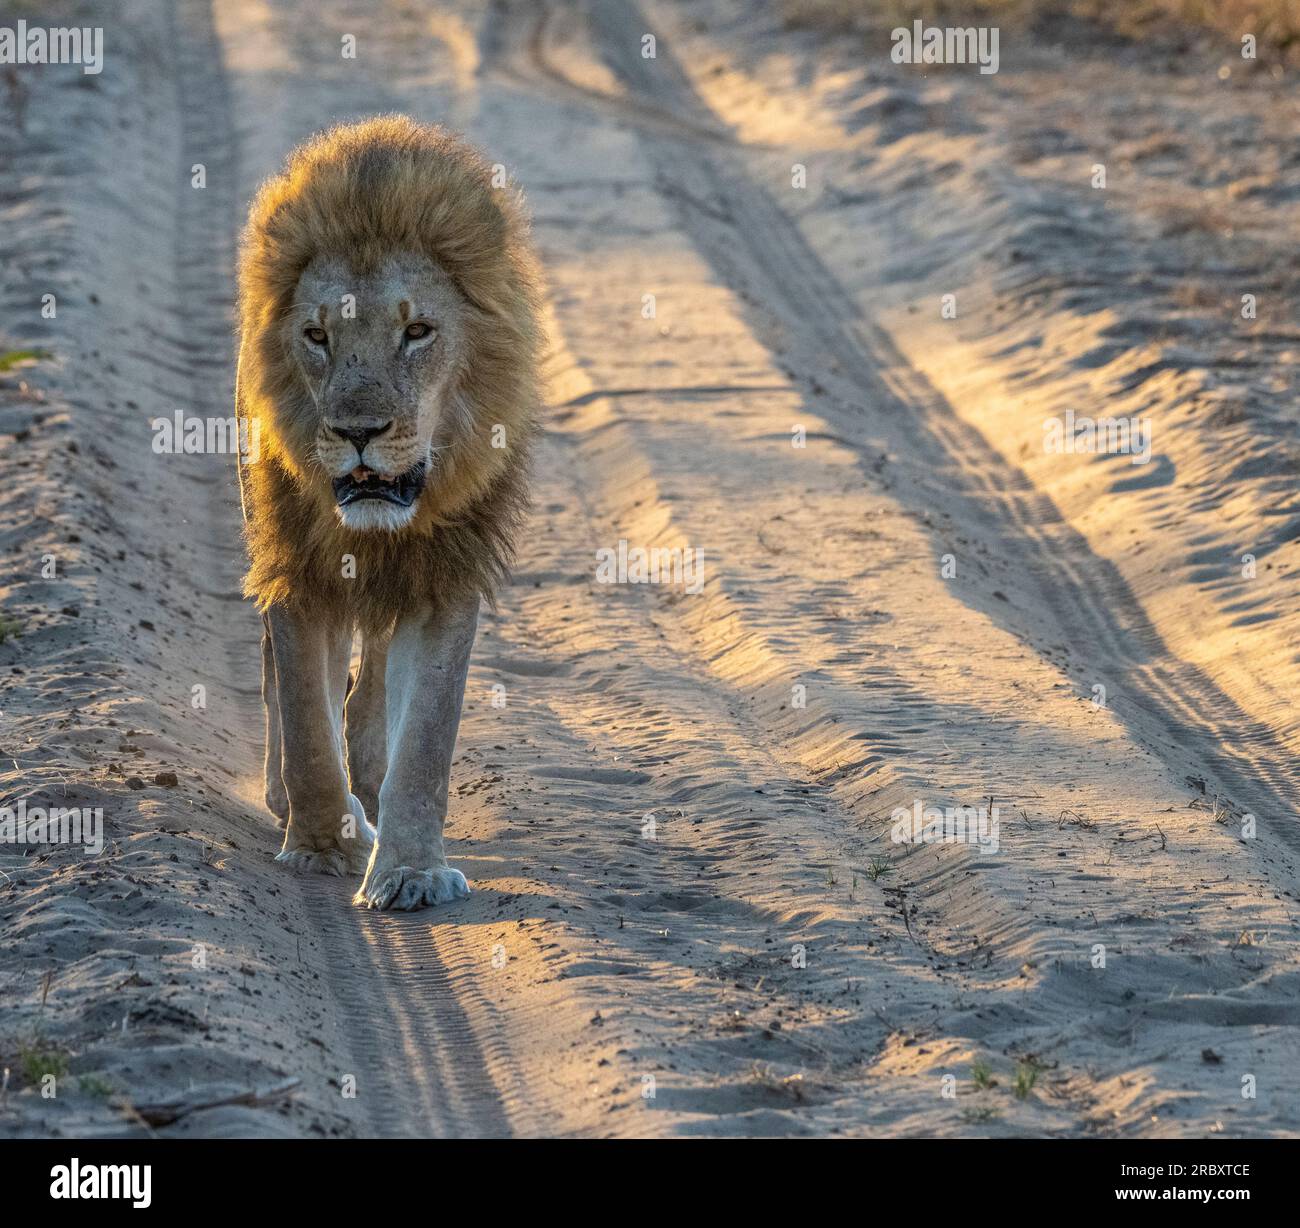 African Lion in Mana Pools National Park in Zimbabwe, Africa. Stock Photo